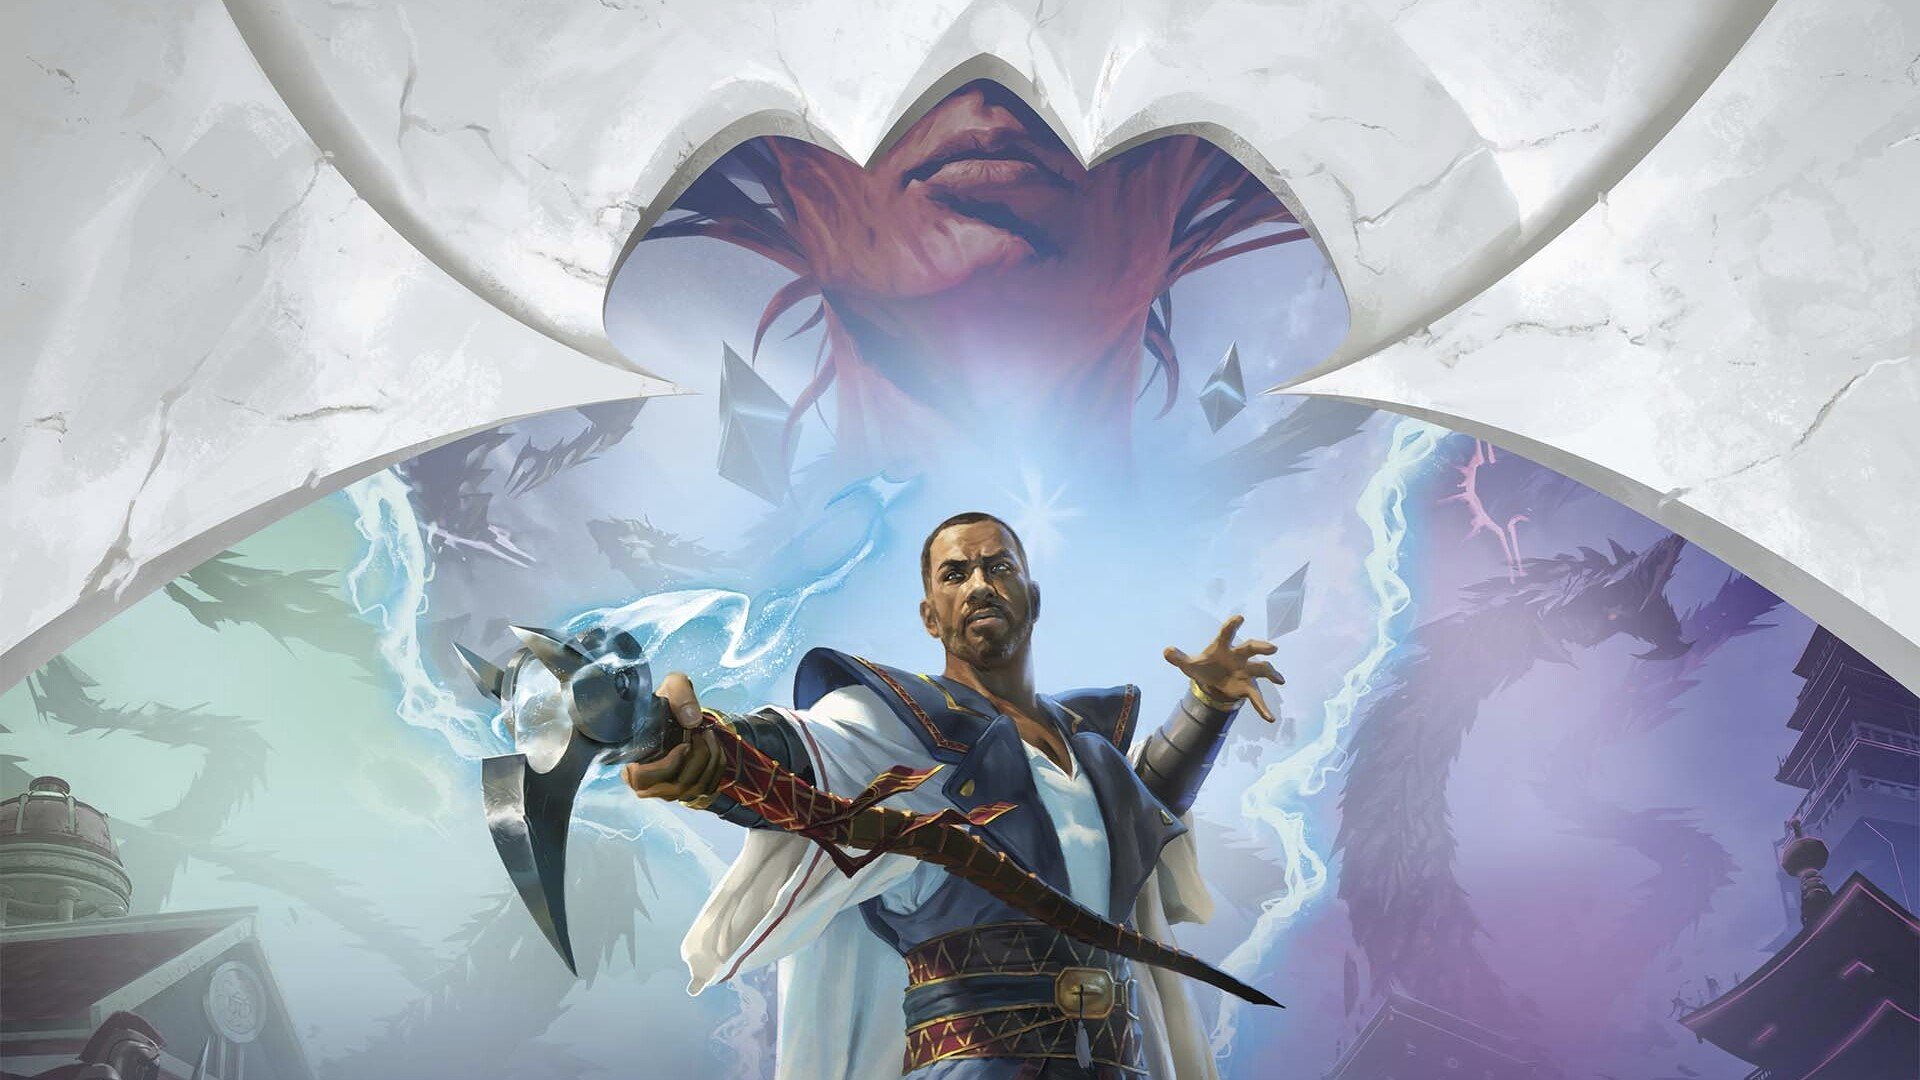 MTG release schedule 2023 - Wizards of the Coast art of the planeswalker teferi beneath a giant image of the head of Elesh Norn. Surrounding the planeswalker are images of phyrexian tendrils bursting from the ground in Theros and Kamigawa.